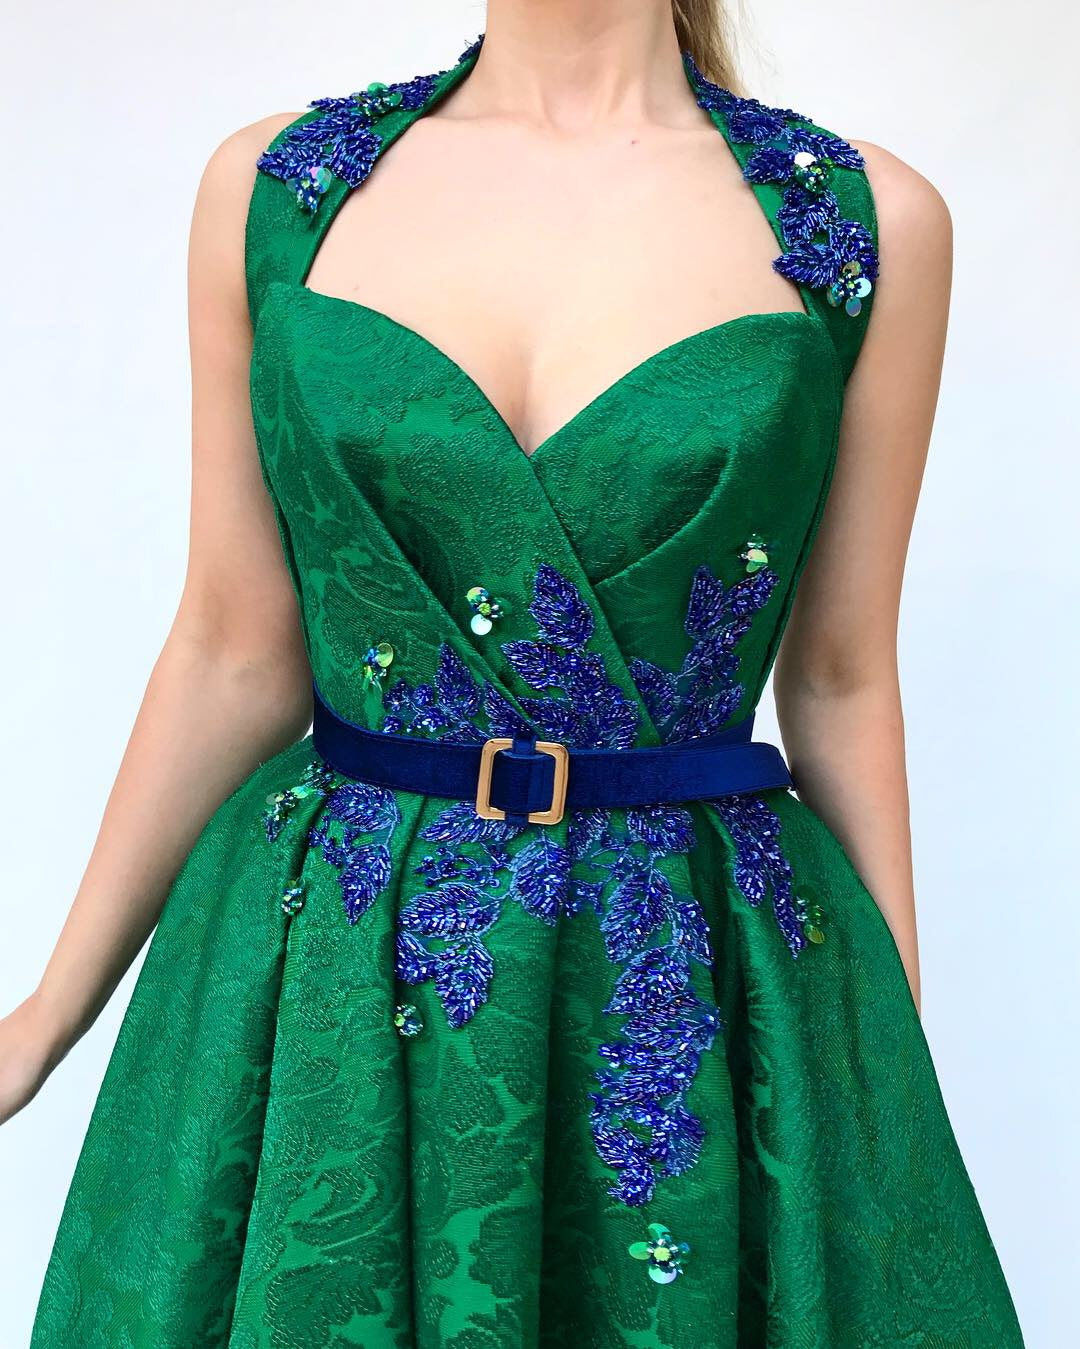 Green A-Line dress with belt, embroidery and straps